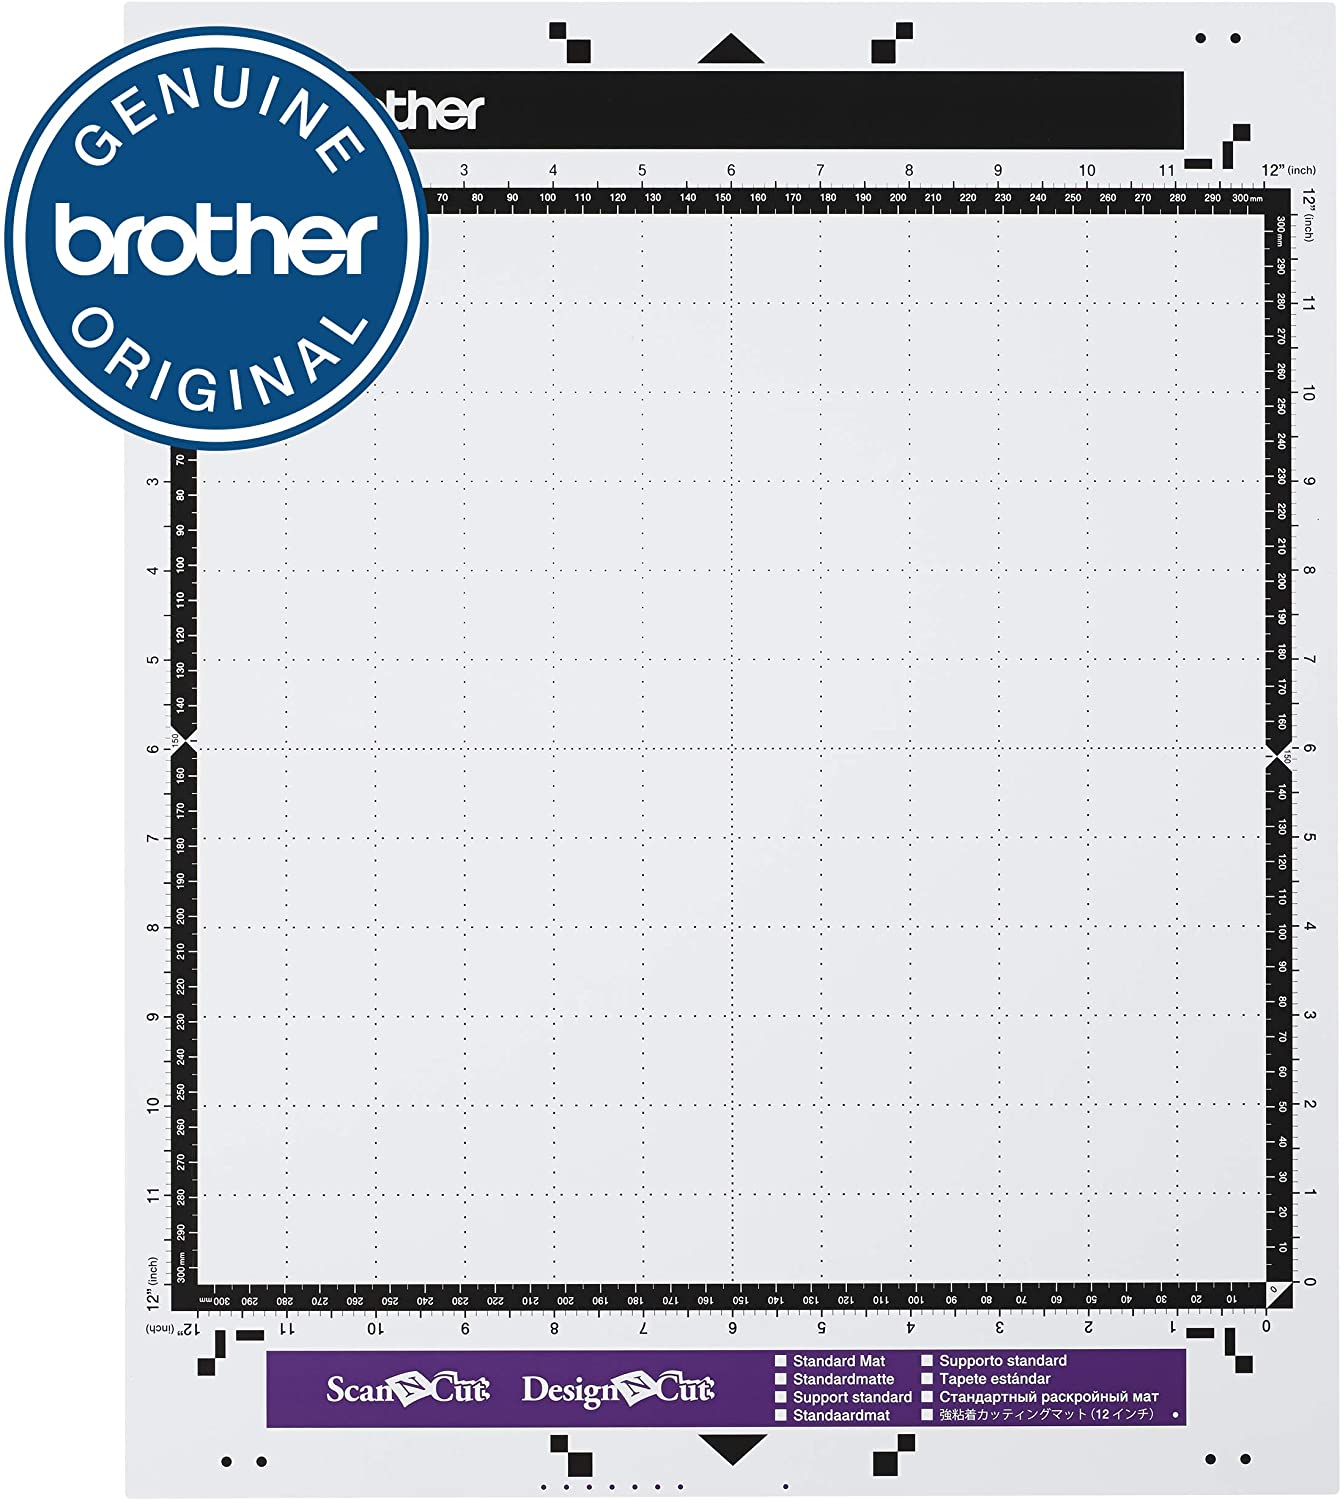 Brother Scan n Cut: How to use the ScanNCut Photo Scanning Mat